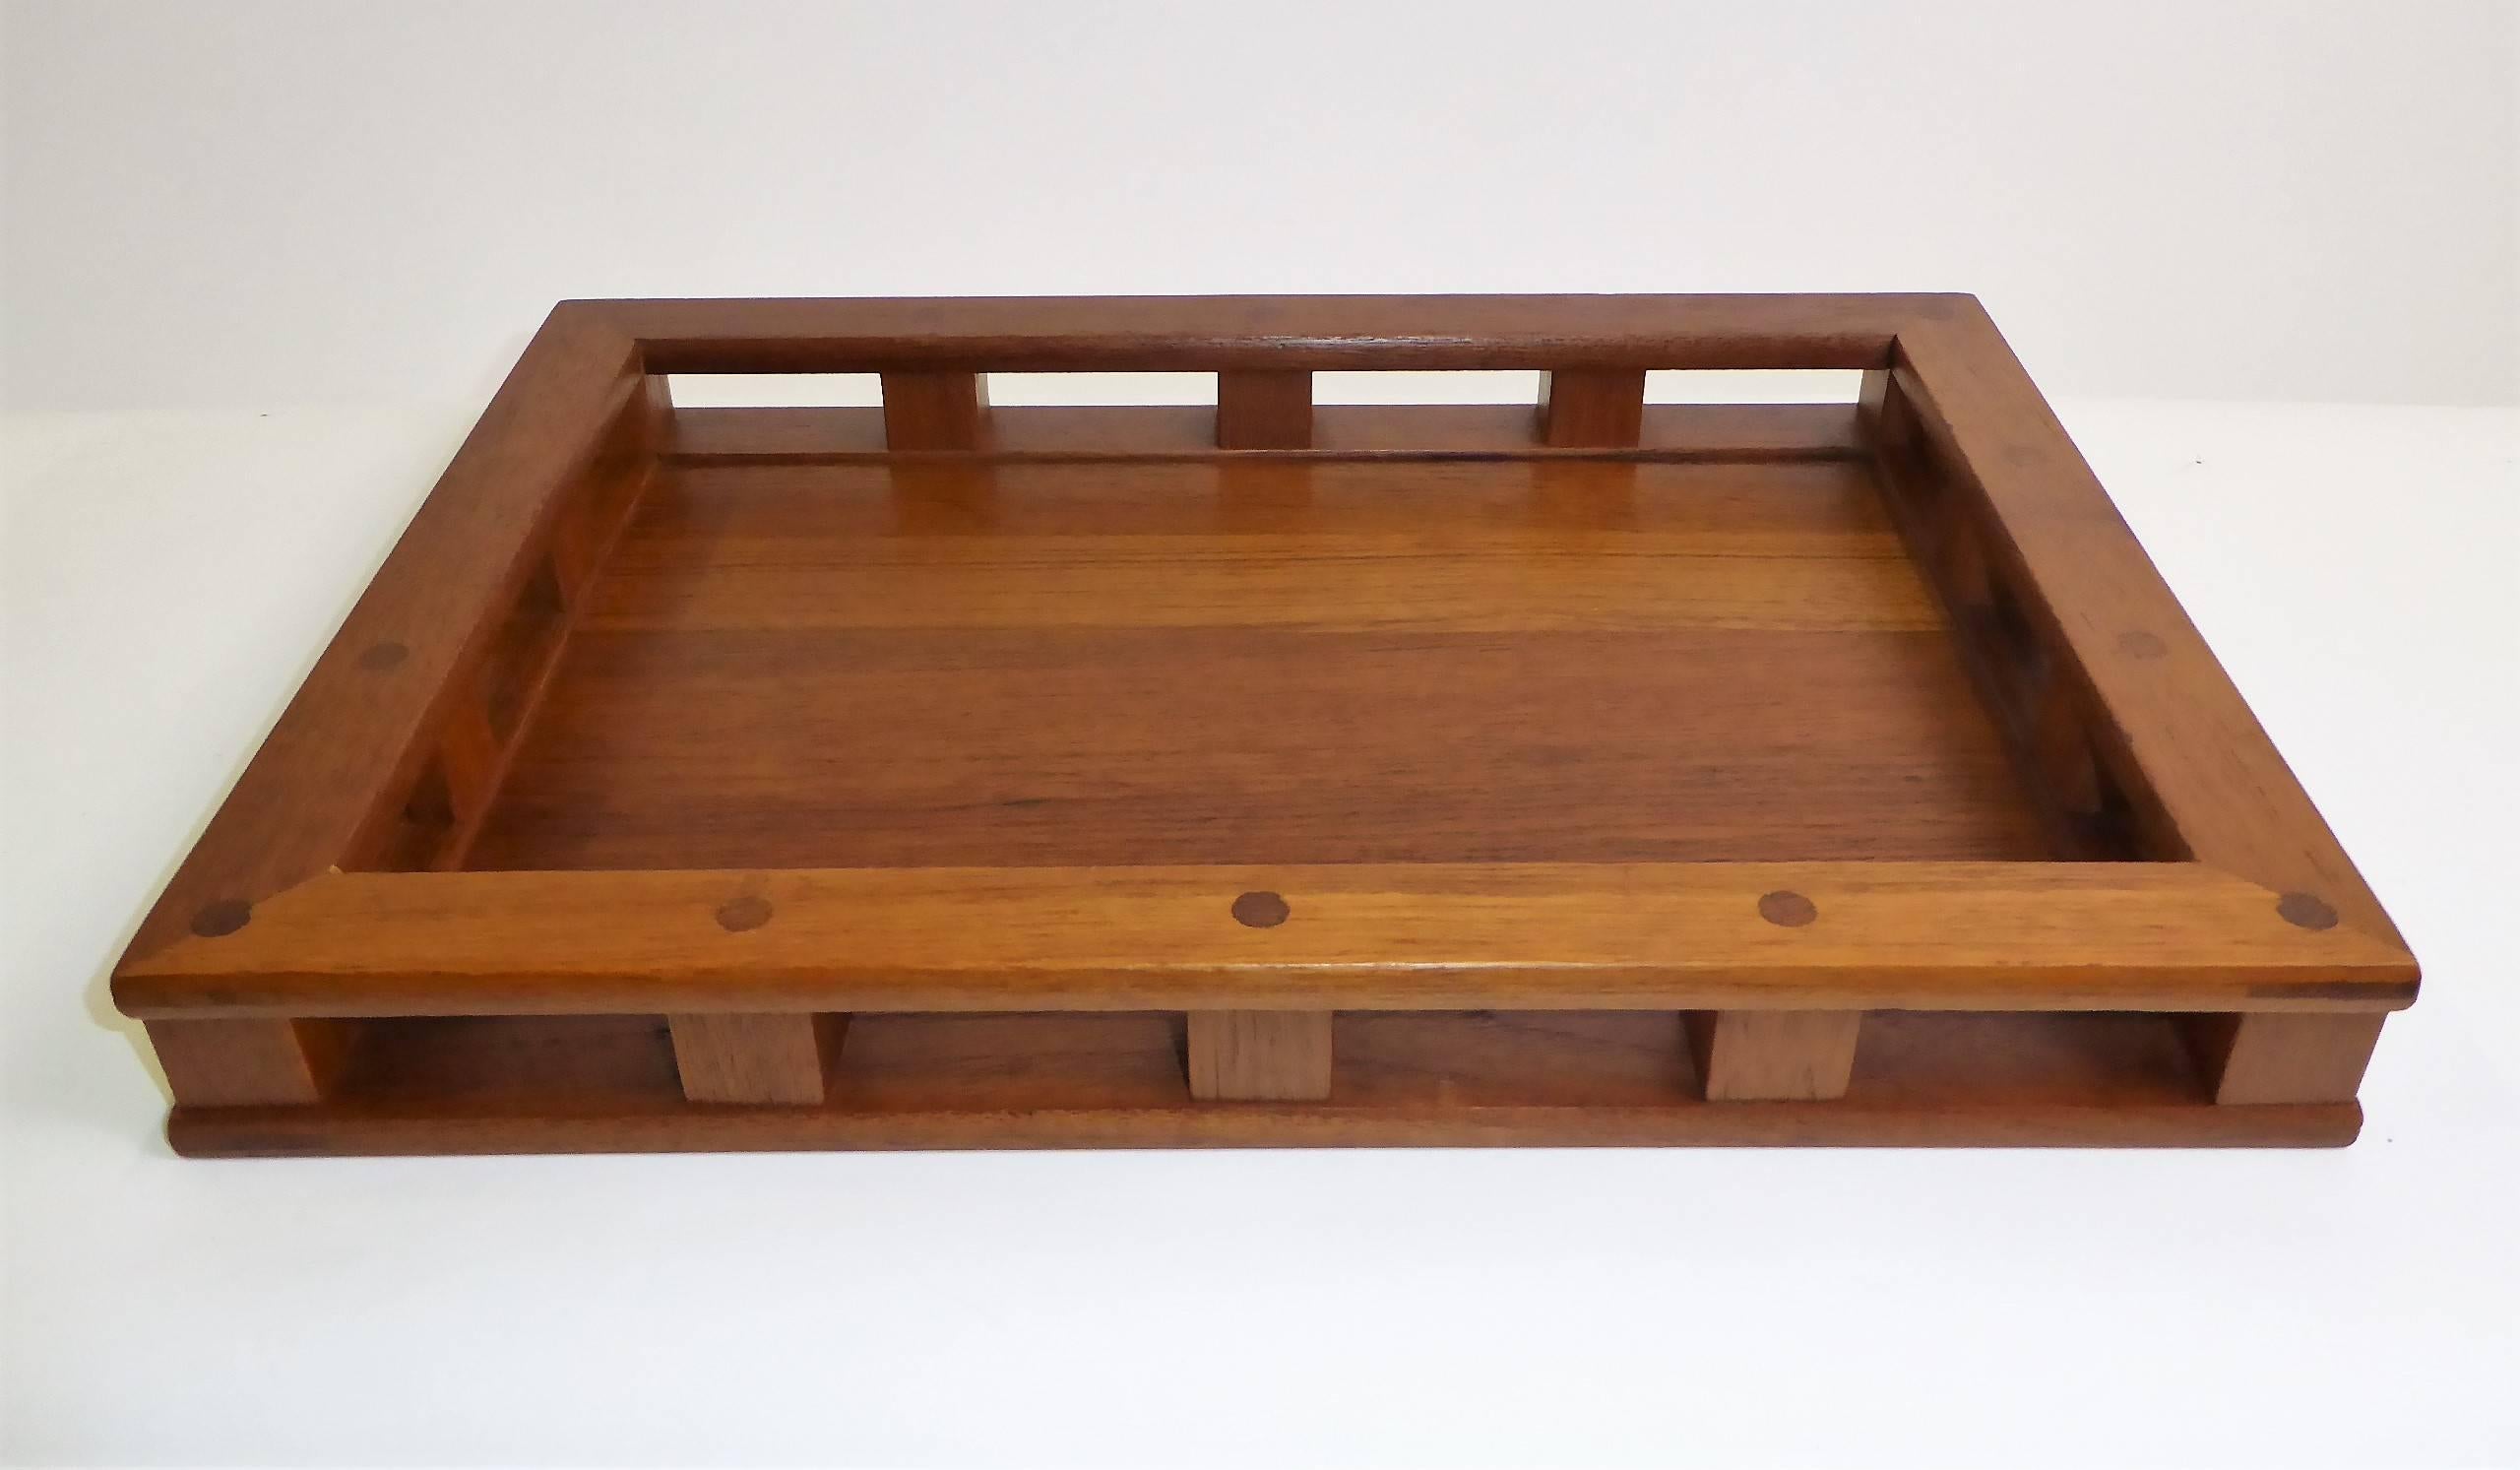 Early Jens Quistgaard Teak Serving Tray with Glass Inserts 2